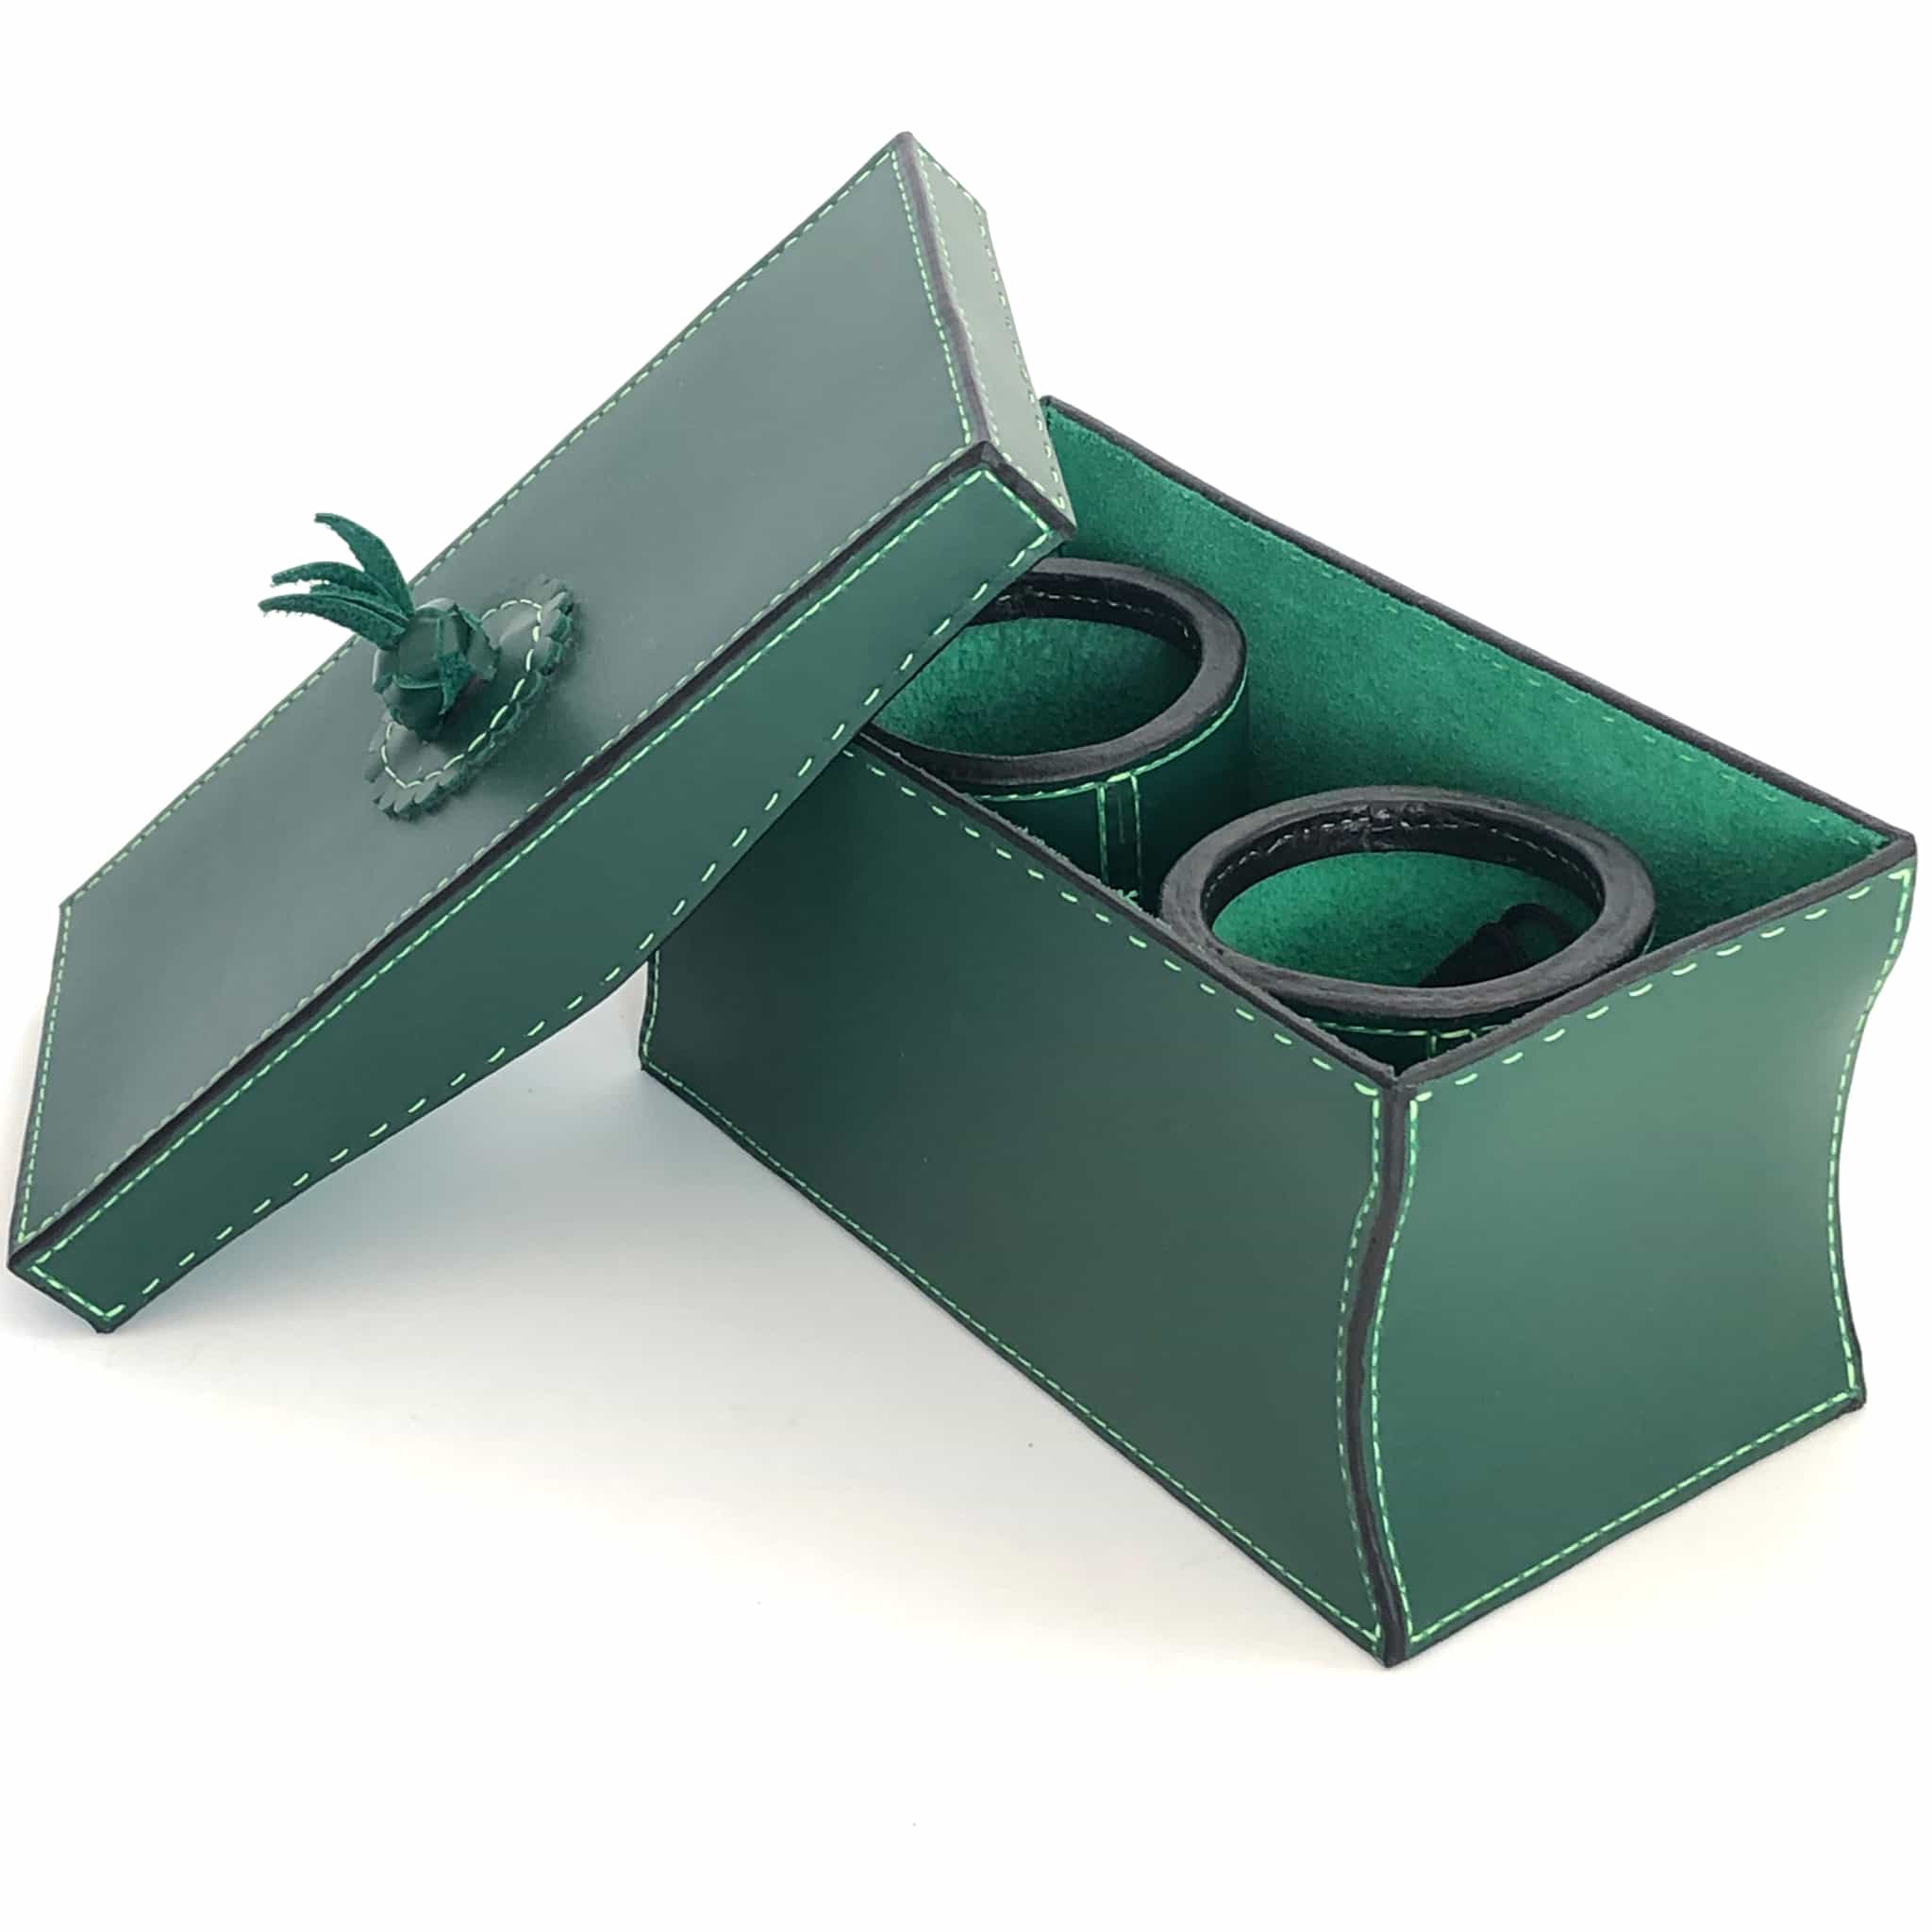 Dice cups and game box in forrest green with lid off